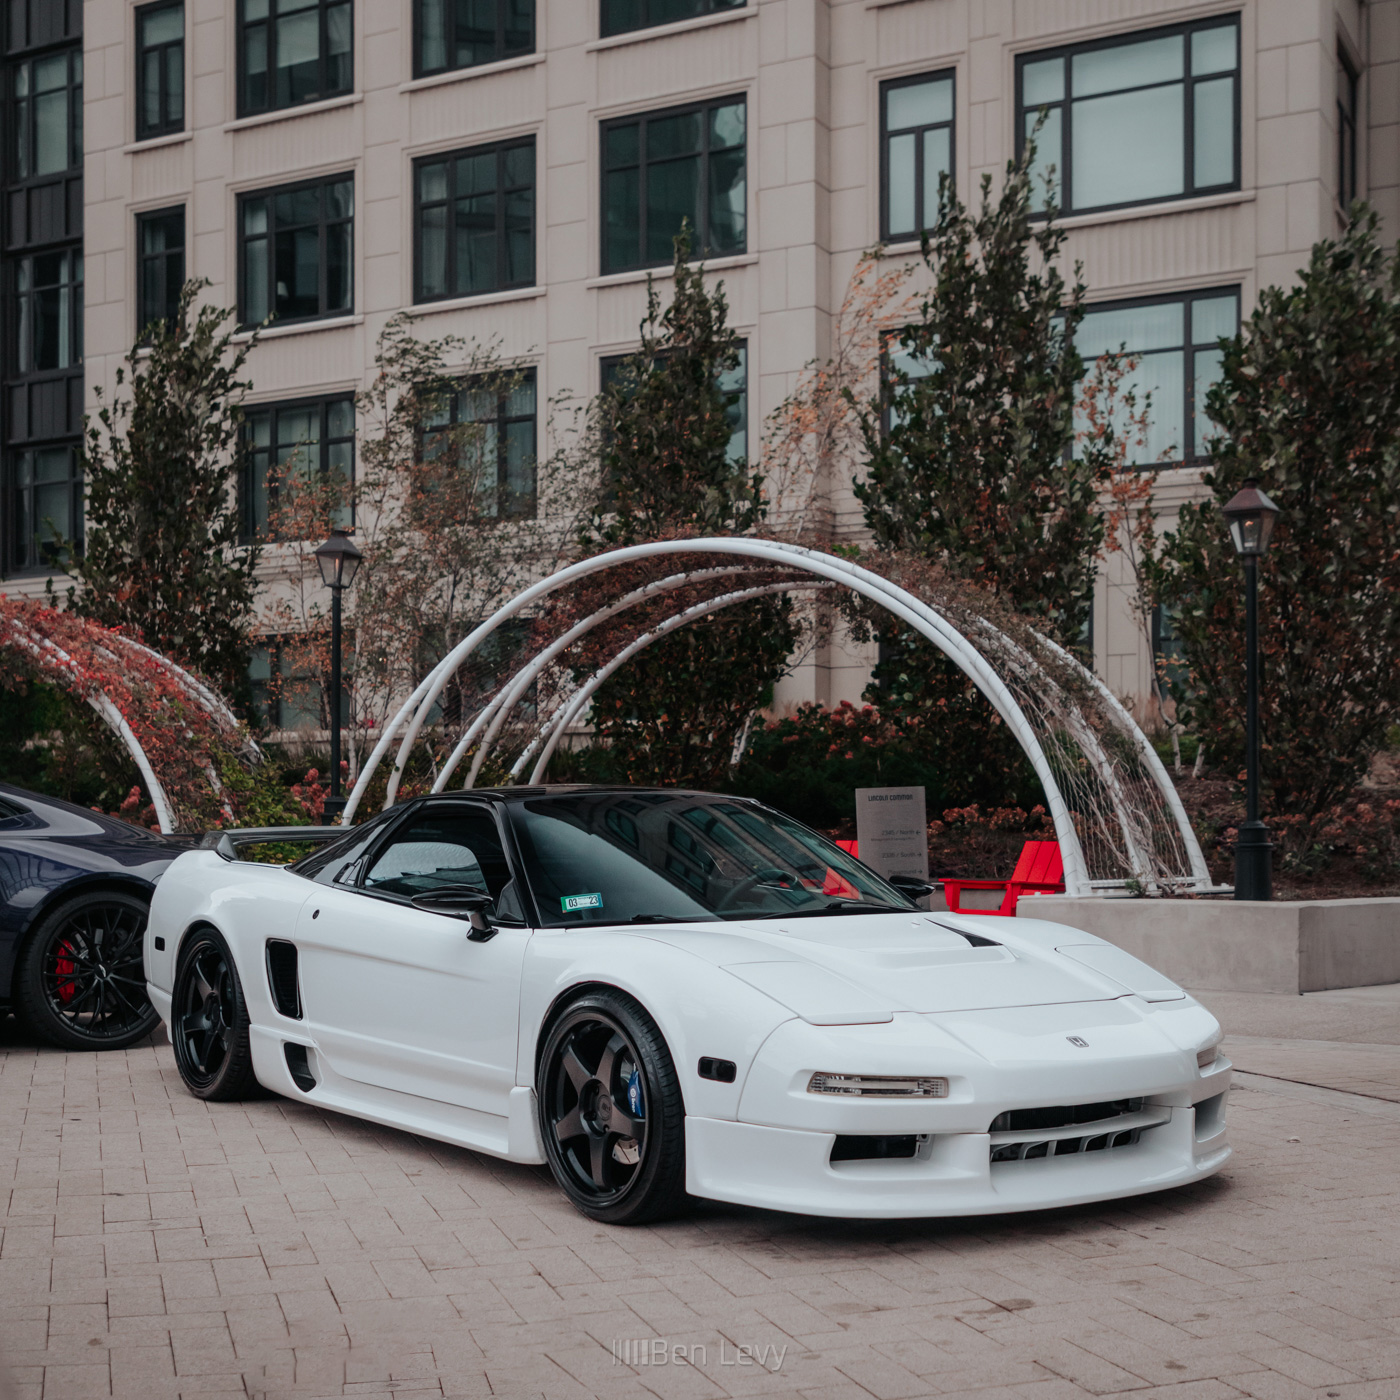 White Acura NSX at Car Meet in Chicago